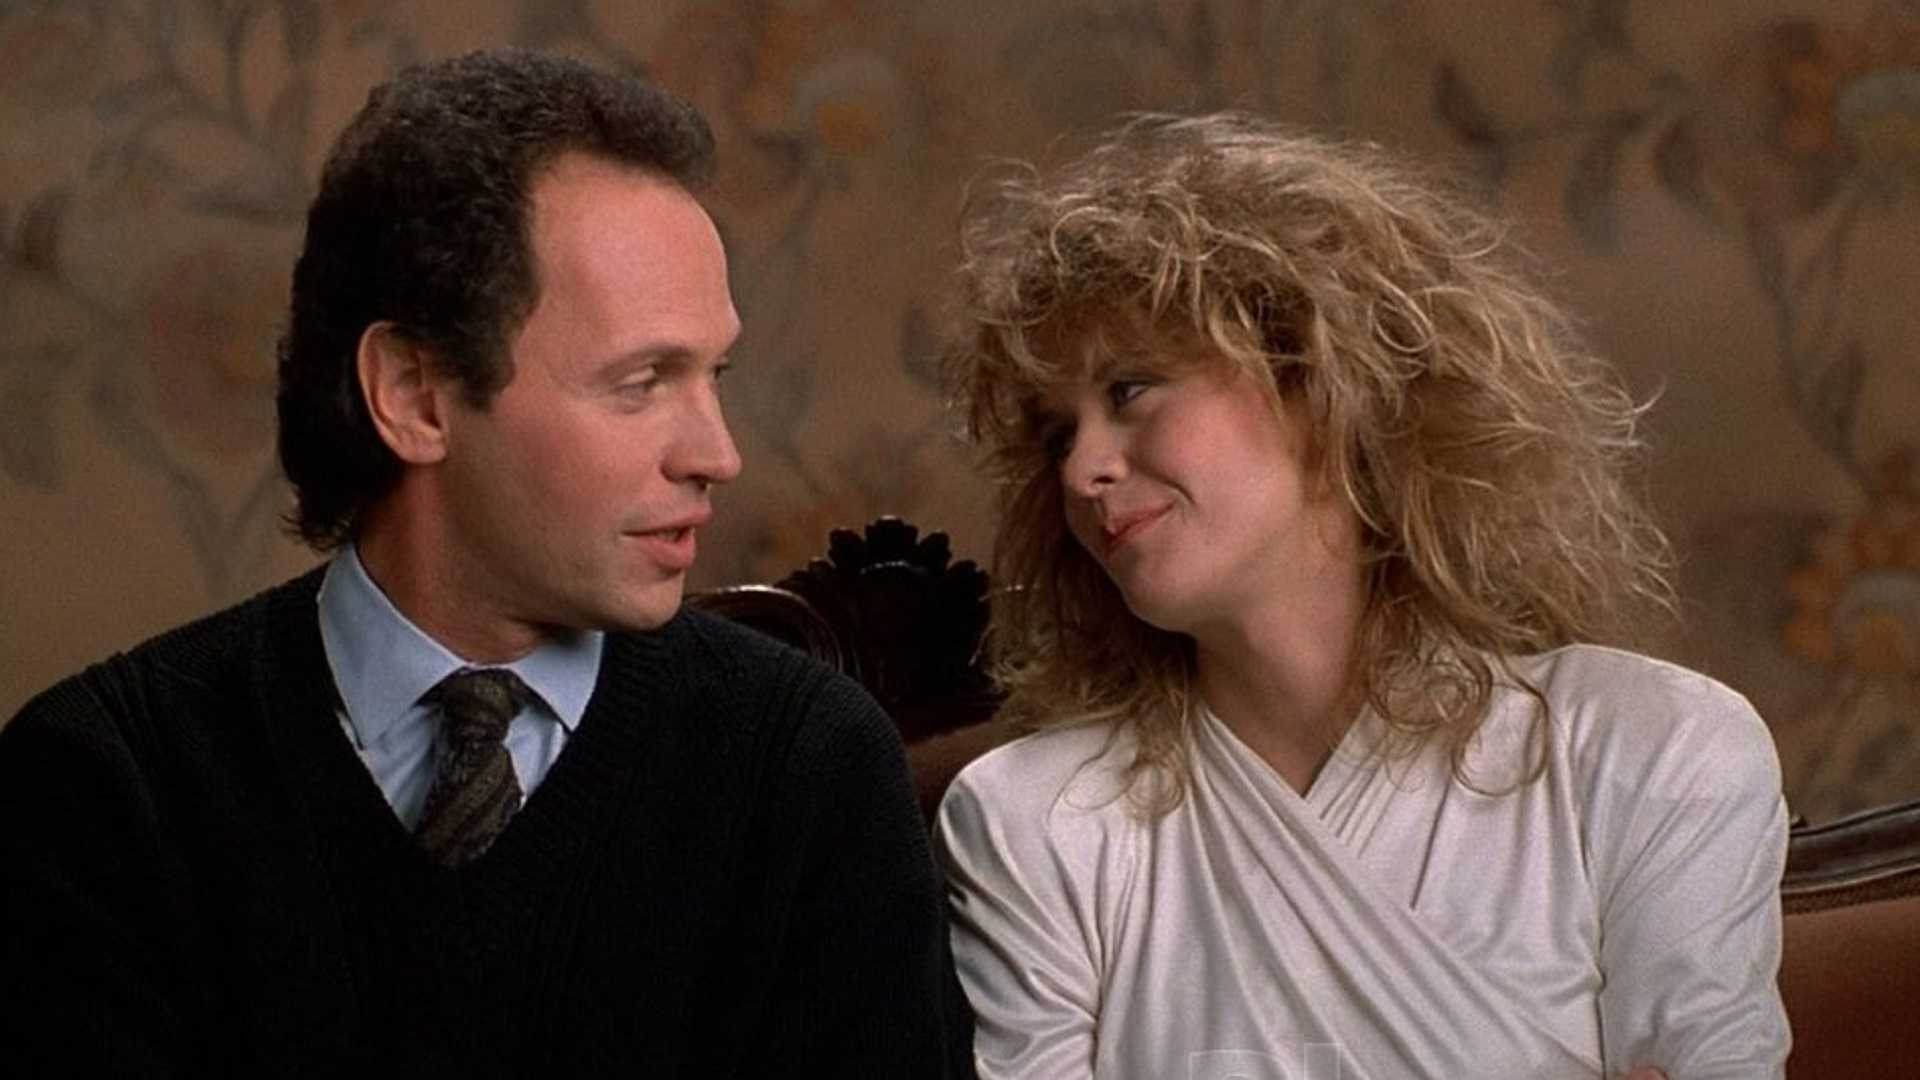 Things You Never Knew About 'When Harry Met Sally' on its 30th Anniversary